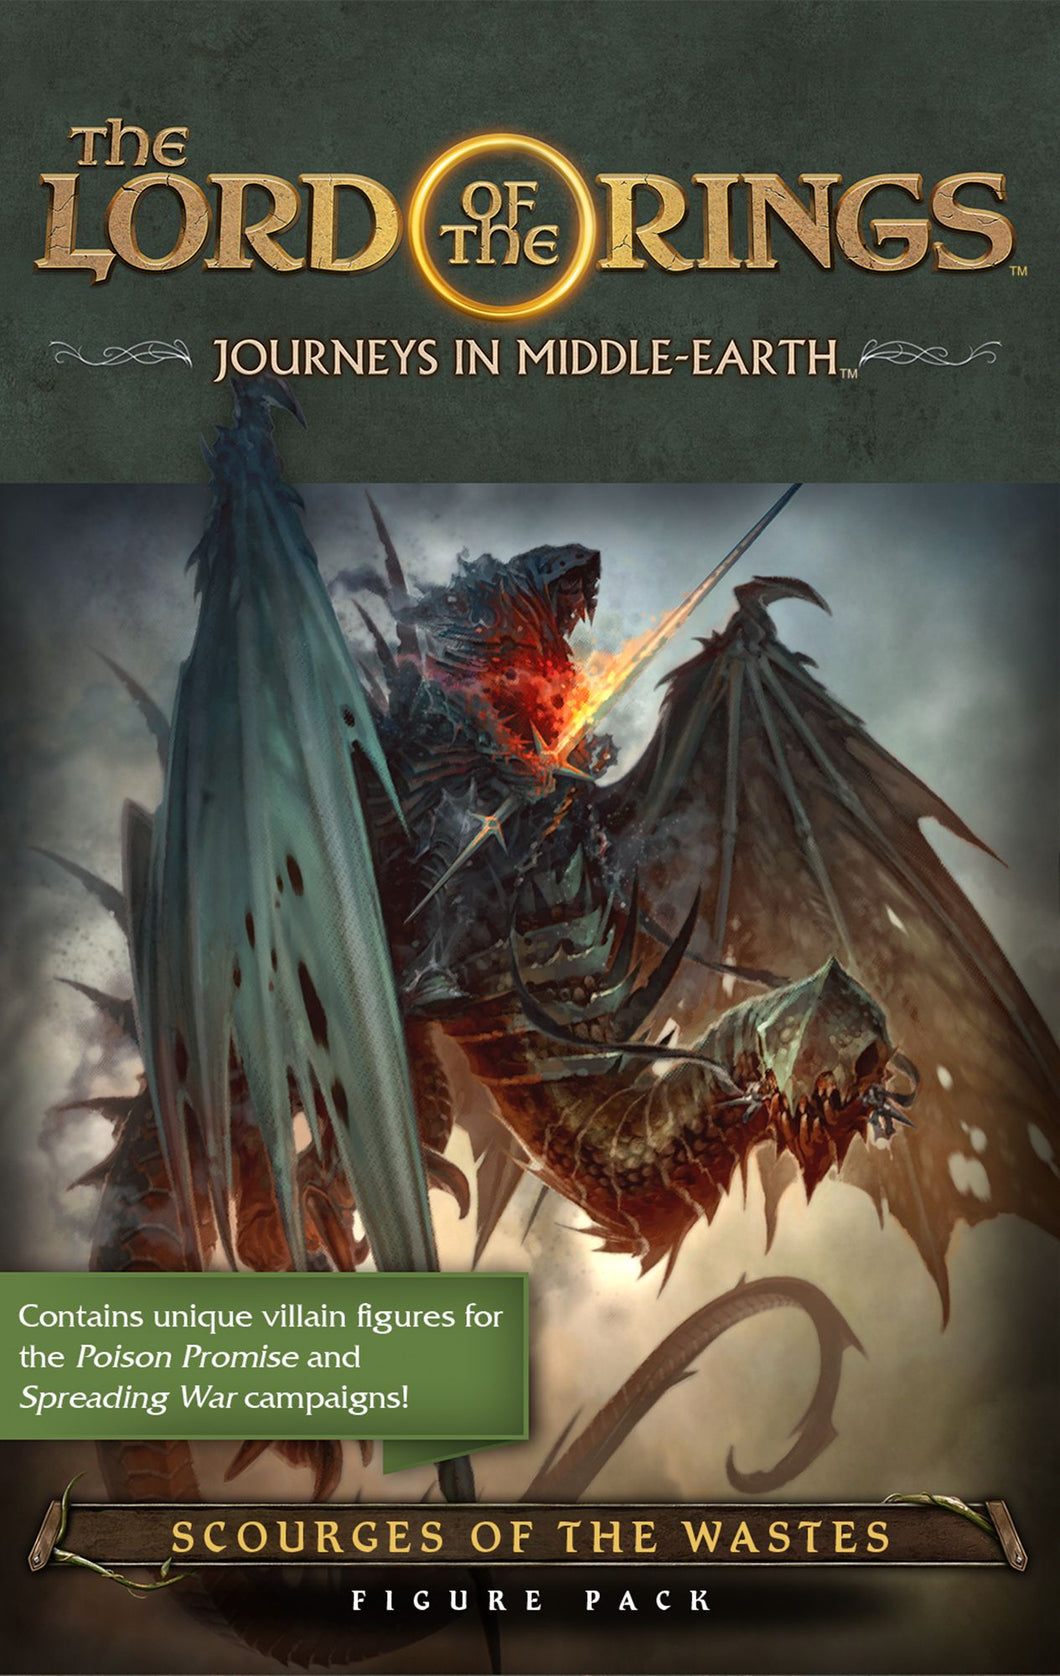 The Lord of the Rings Journeys in Middle Earth Scourges of the Wastes Figure Pack